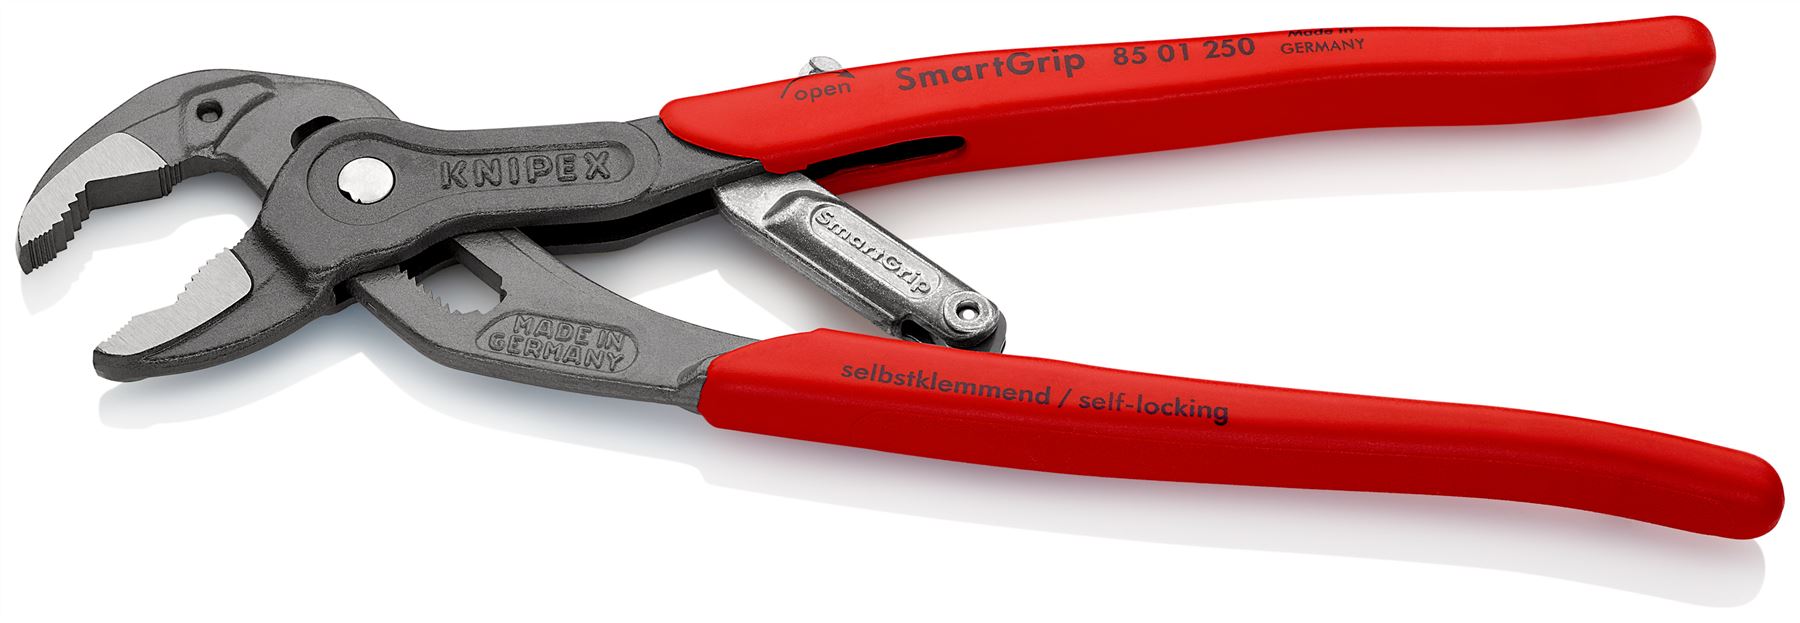 Knipex SmartGrip Water Pump Pliers with Automatic Adjustment 250mm 85 01 250